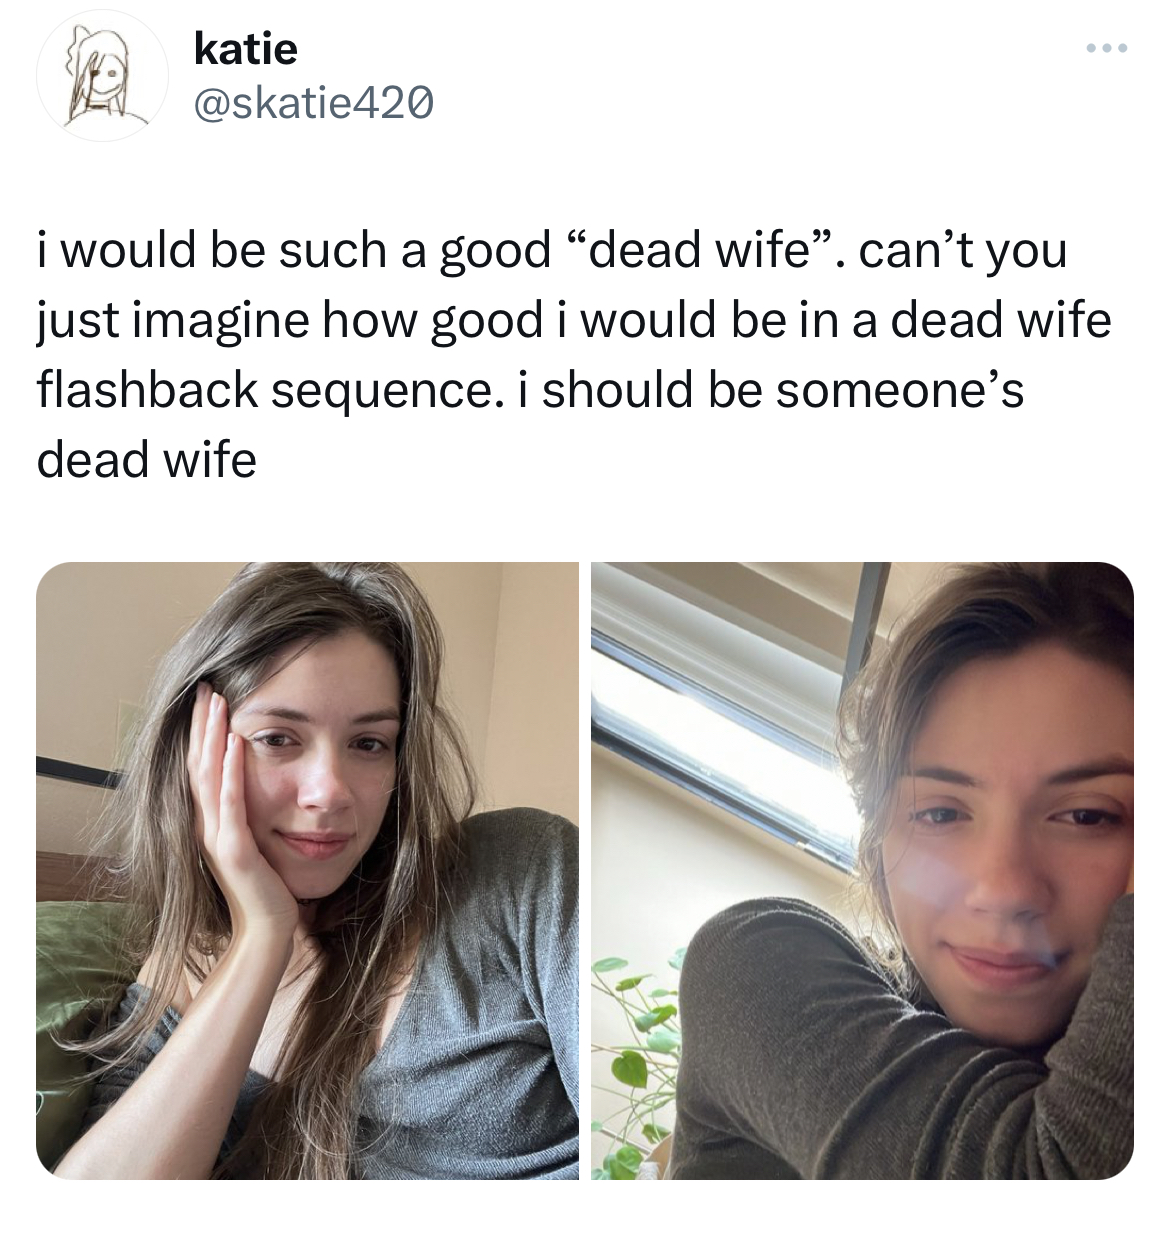 savage tweets - girl - katie www i would be such a good "dead wife". can't you just imagine how good i would be in a dead wife flashback sequence. i should be someone's dead wife